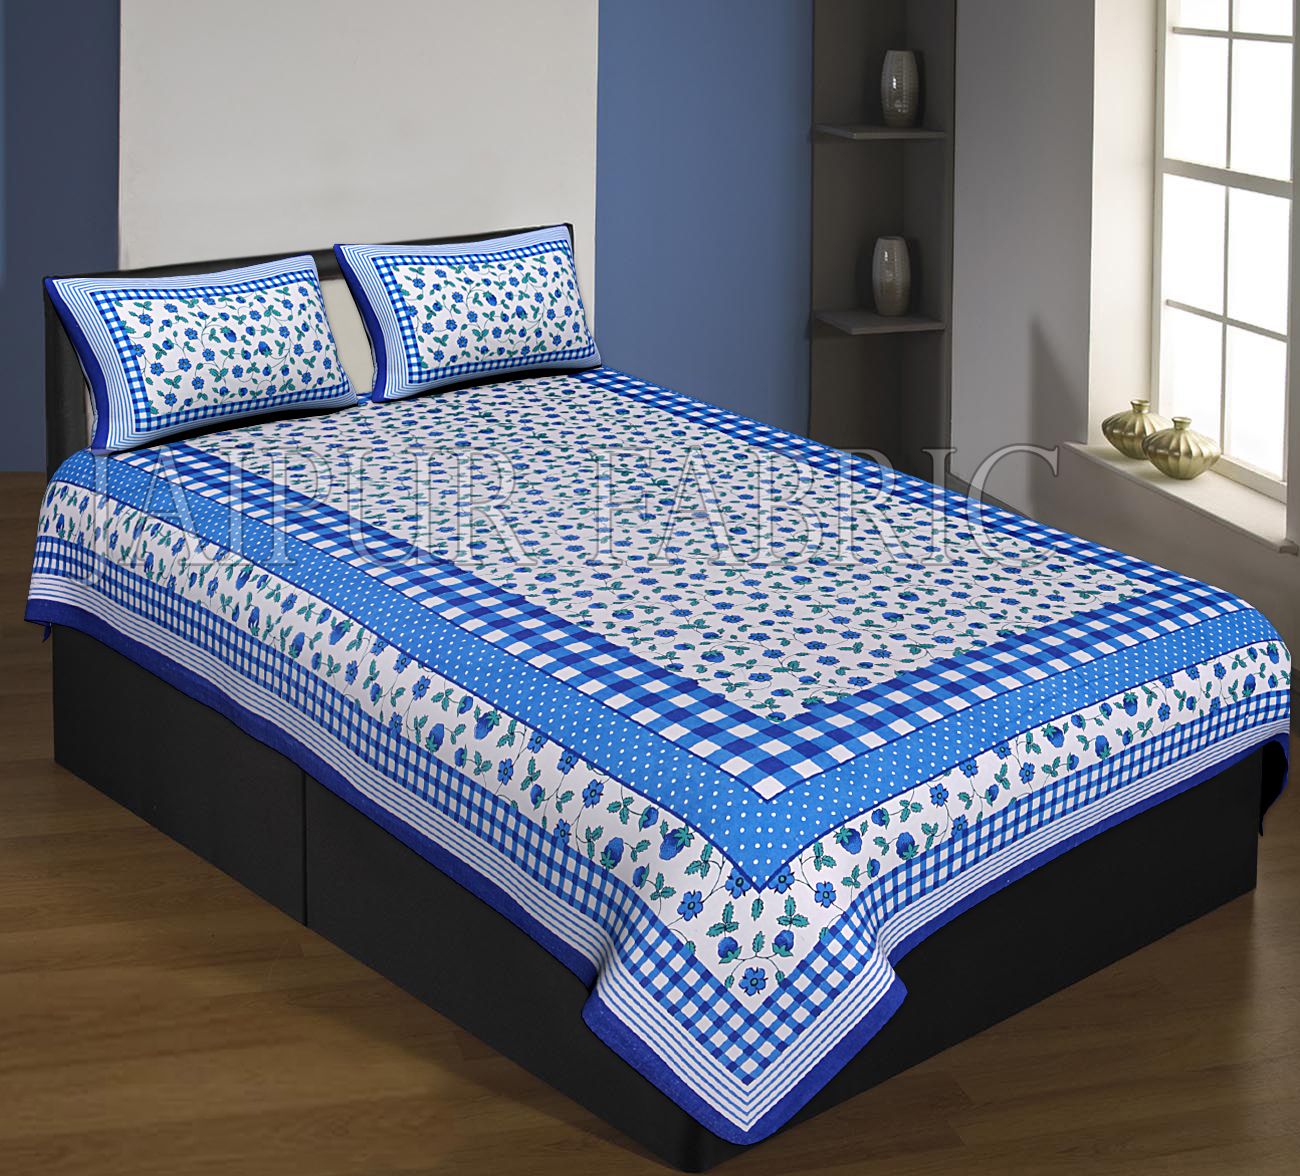 Blue Boarder With Check Print And Dot Flower Pattern Single Bed Sheet With 2 Pillow Cover